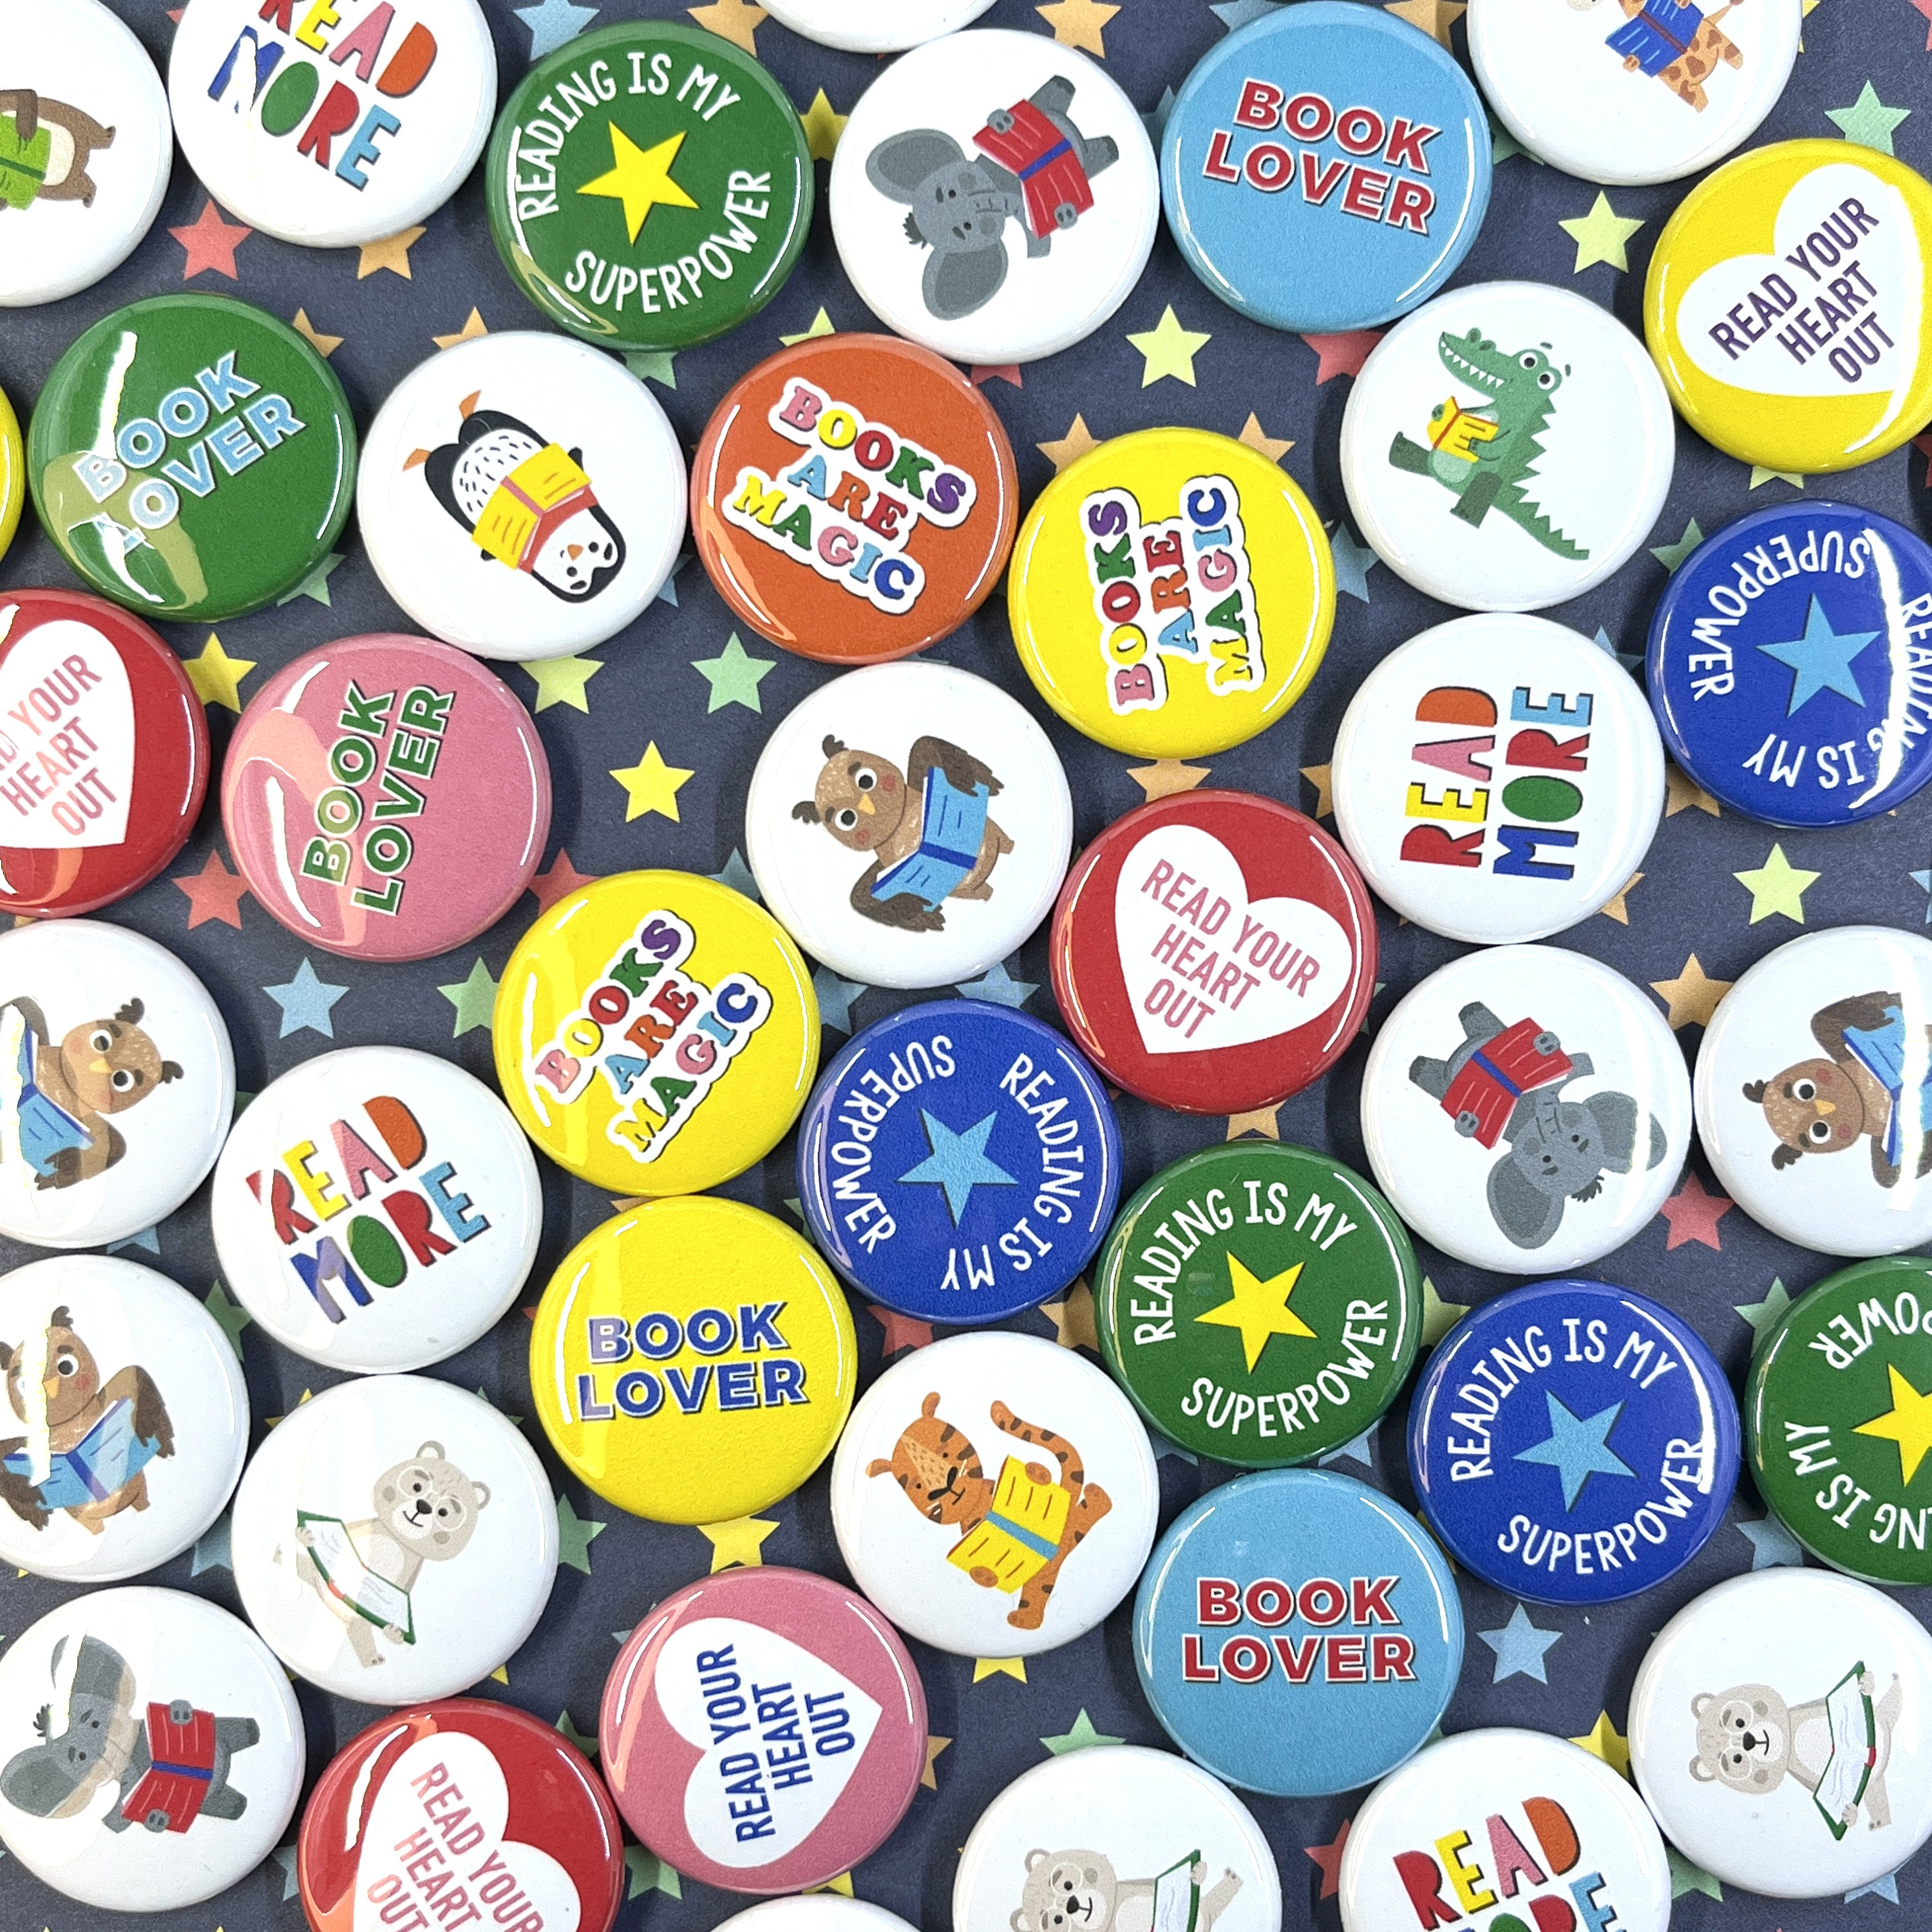 KIDS BUTTON MIX | bulk quantity pin badge flair 1 inch tweens prizes  classroom stocking stuffers party favors halloween school event